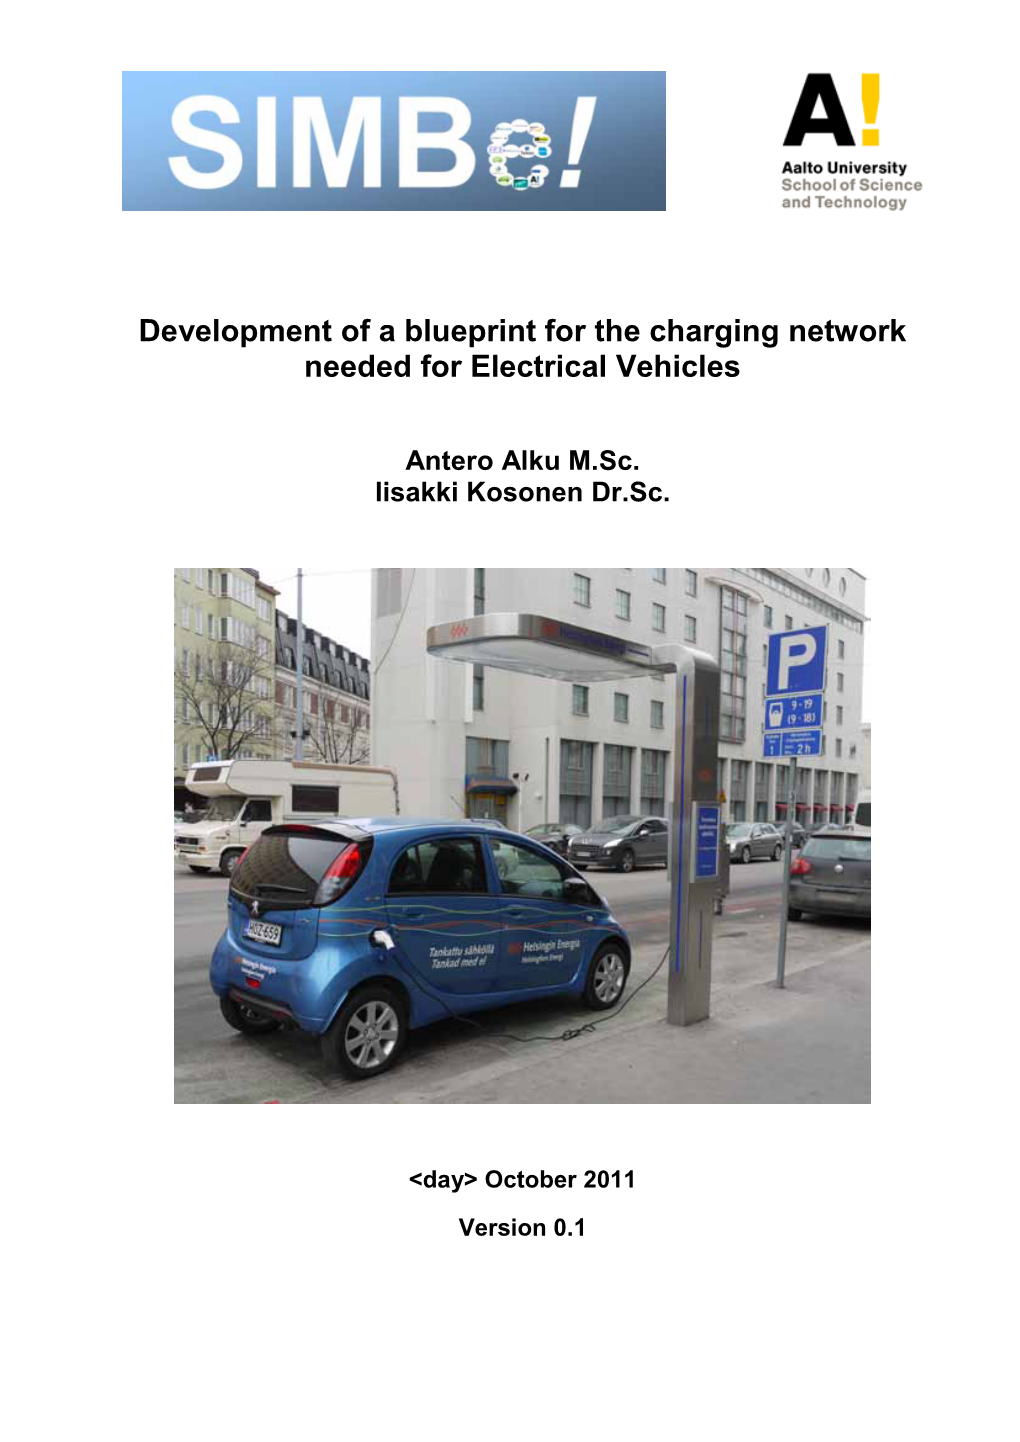 Development of a Blueprint for the Charging Network Needed for Electrical Vehicles